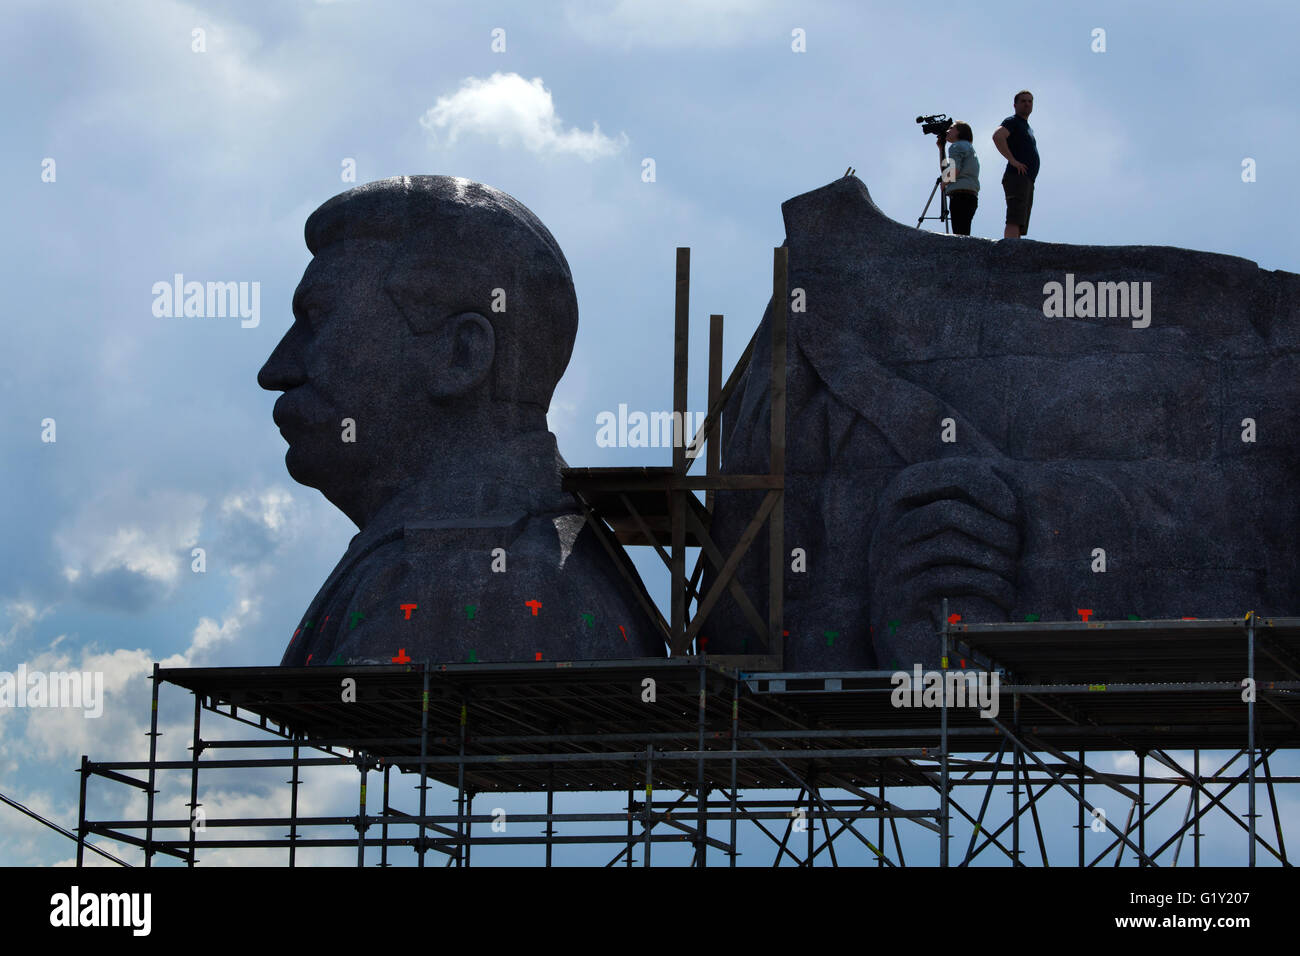 Prague, Czech Republic. 20th May 2016. Huge head of Soviet dictator Joseph Stalin rising over Letna Park in Prague, Czech Republic, during the Czech Television filming the new biopic TV movie Monstrum (The Monster) based on the biography of Czech sculptor Otakar Svec. Stalin returns temporary to the place where the Stalin Monument designed by Otakar Svec stood from 1955 until it was destroyed in 1962. Stock Photo